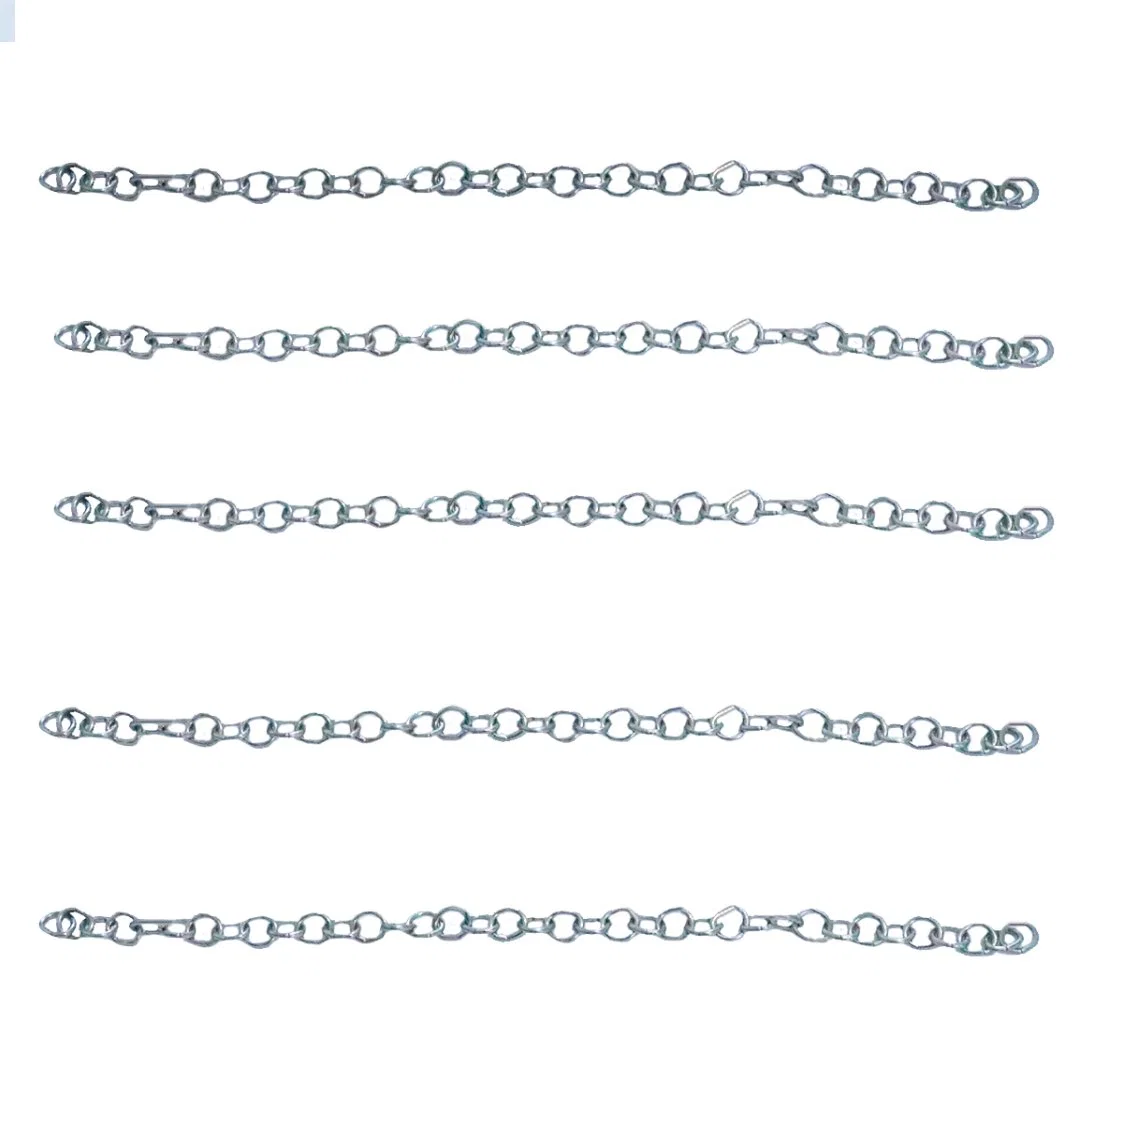 Fashion Accessories Metal Chain for Clothing Jewelry Shoulder Strap Handbag Neck Necklace